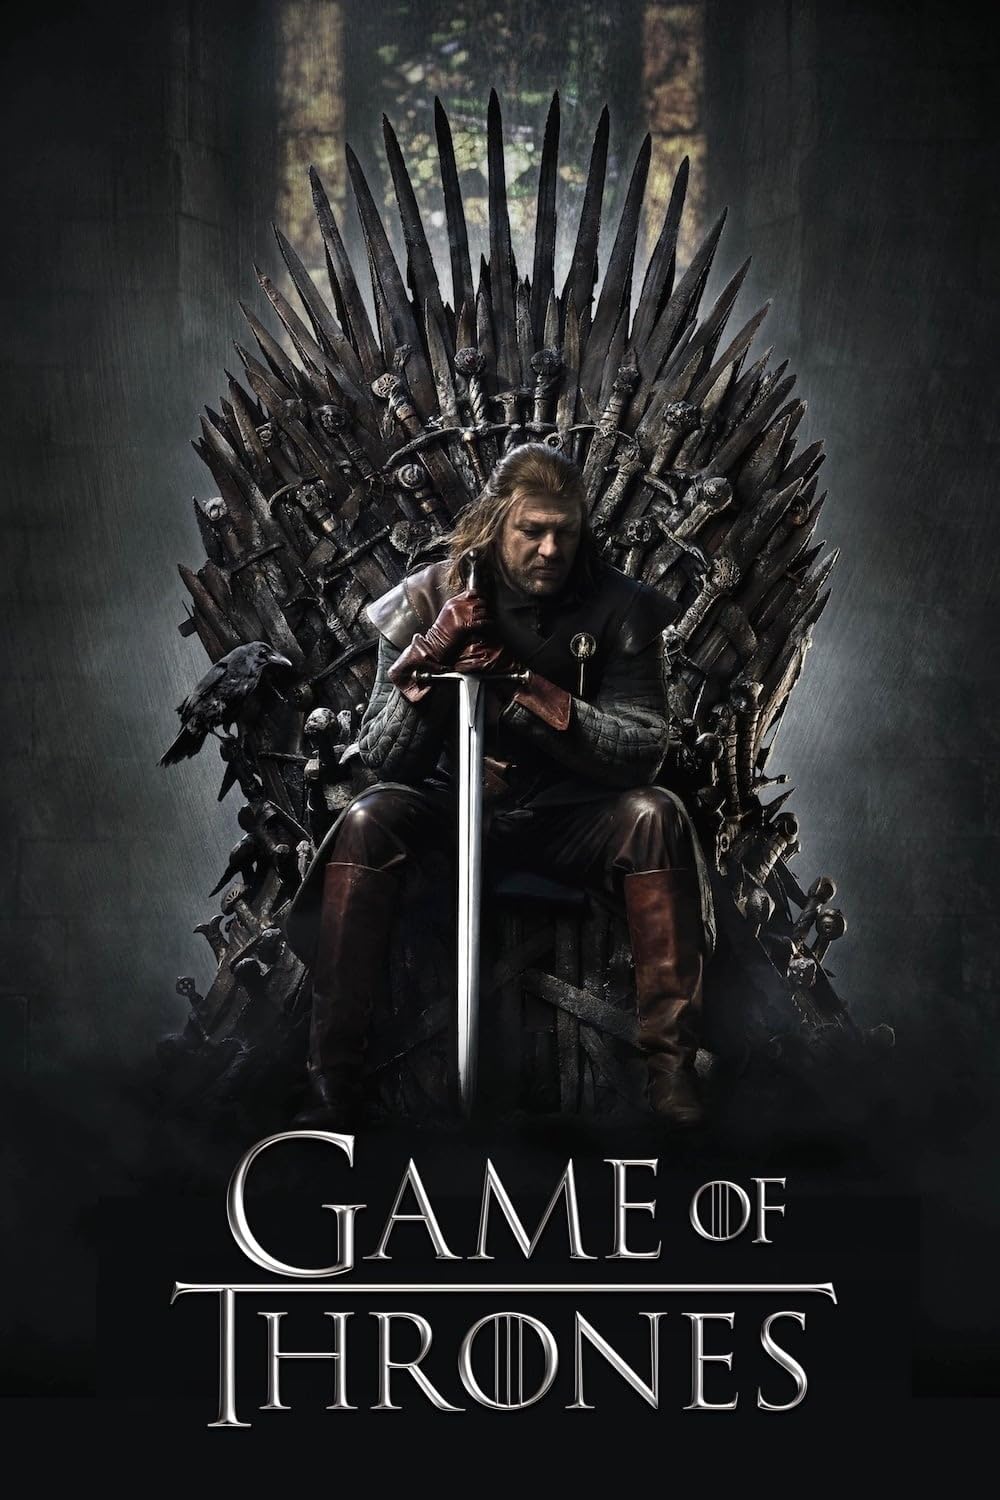 deandra tucker recommends game of thrones torrent season 2 pic